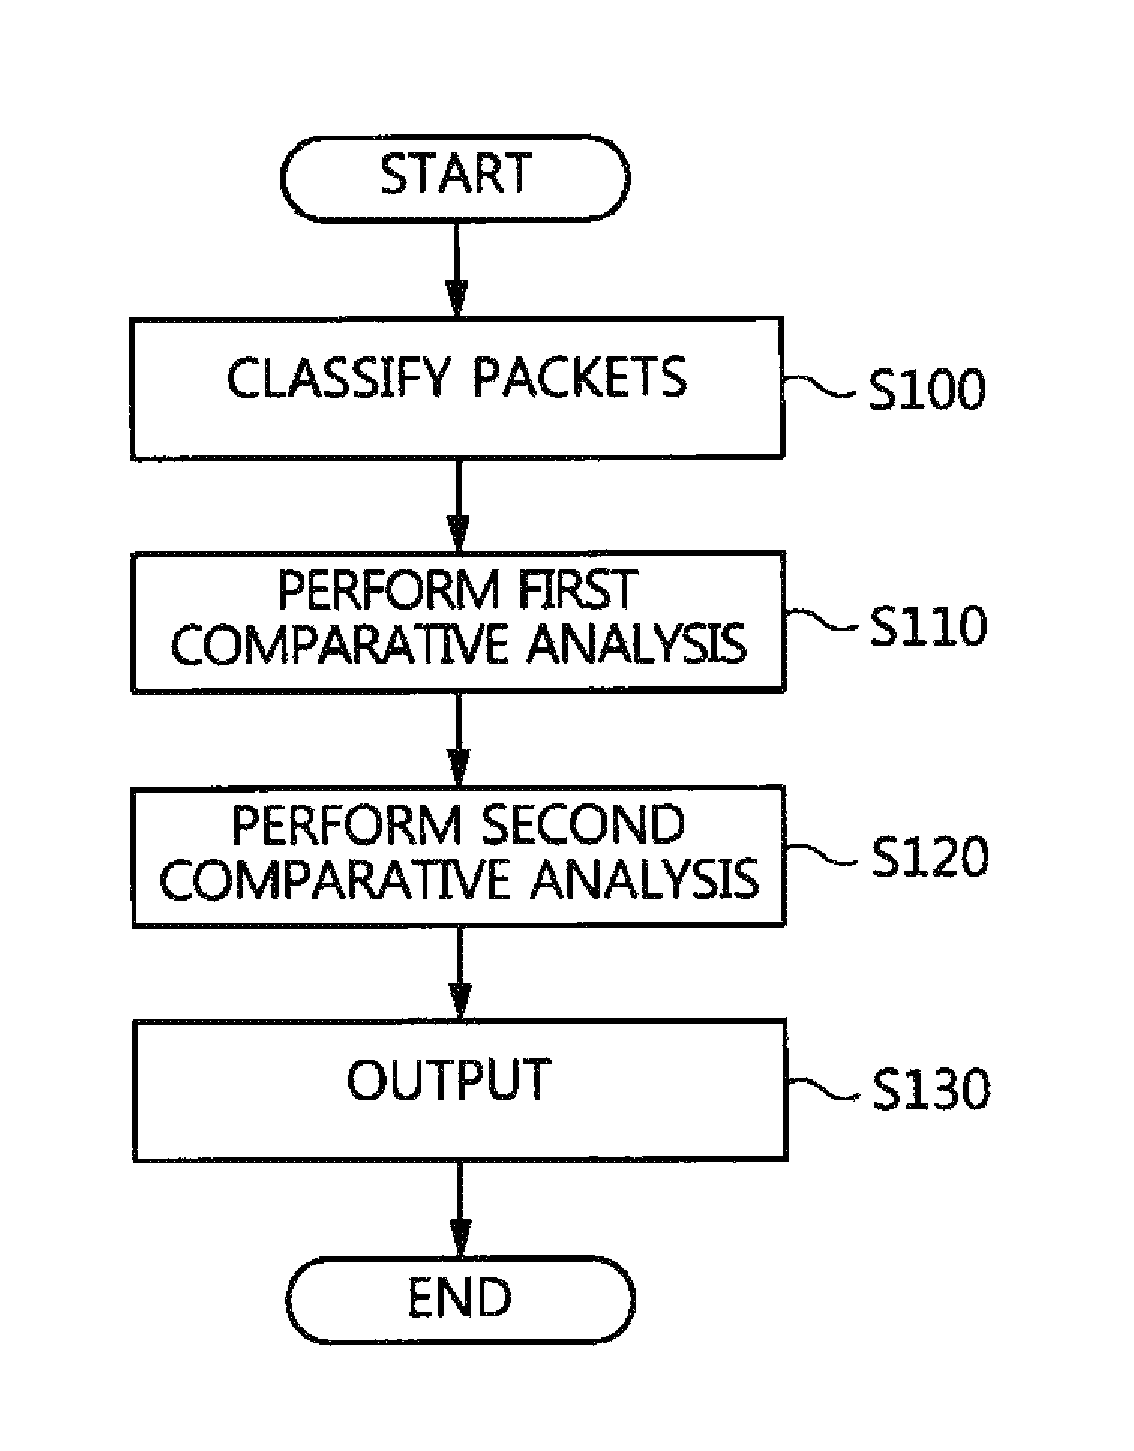 Packet analysis apparatus and method and virtual private network server